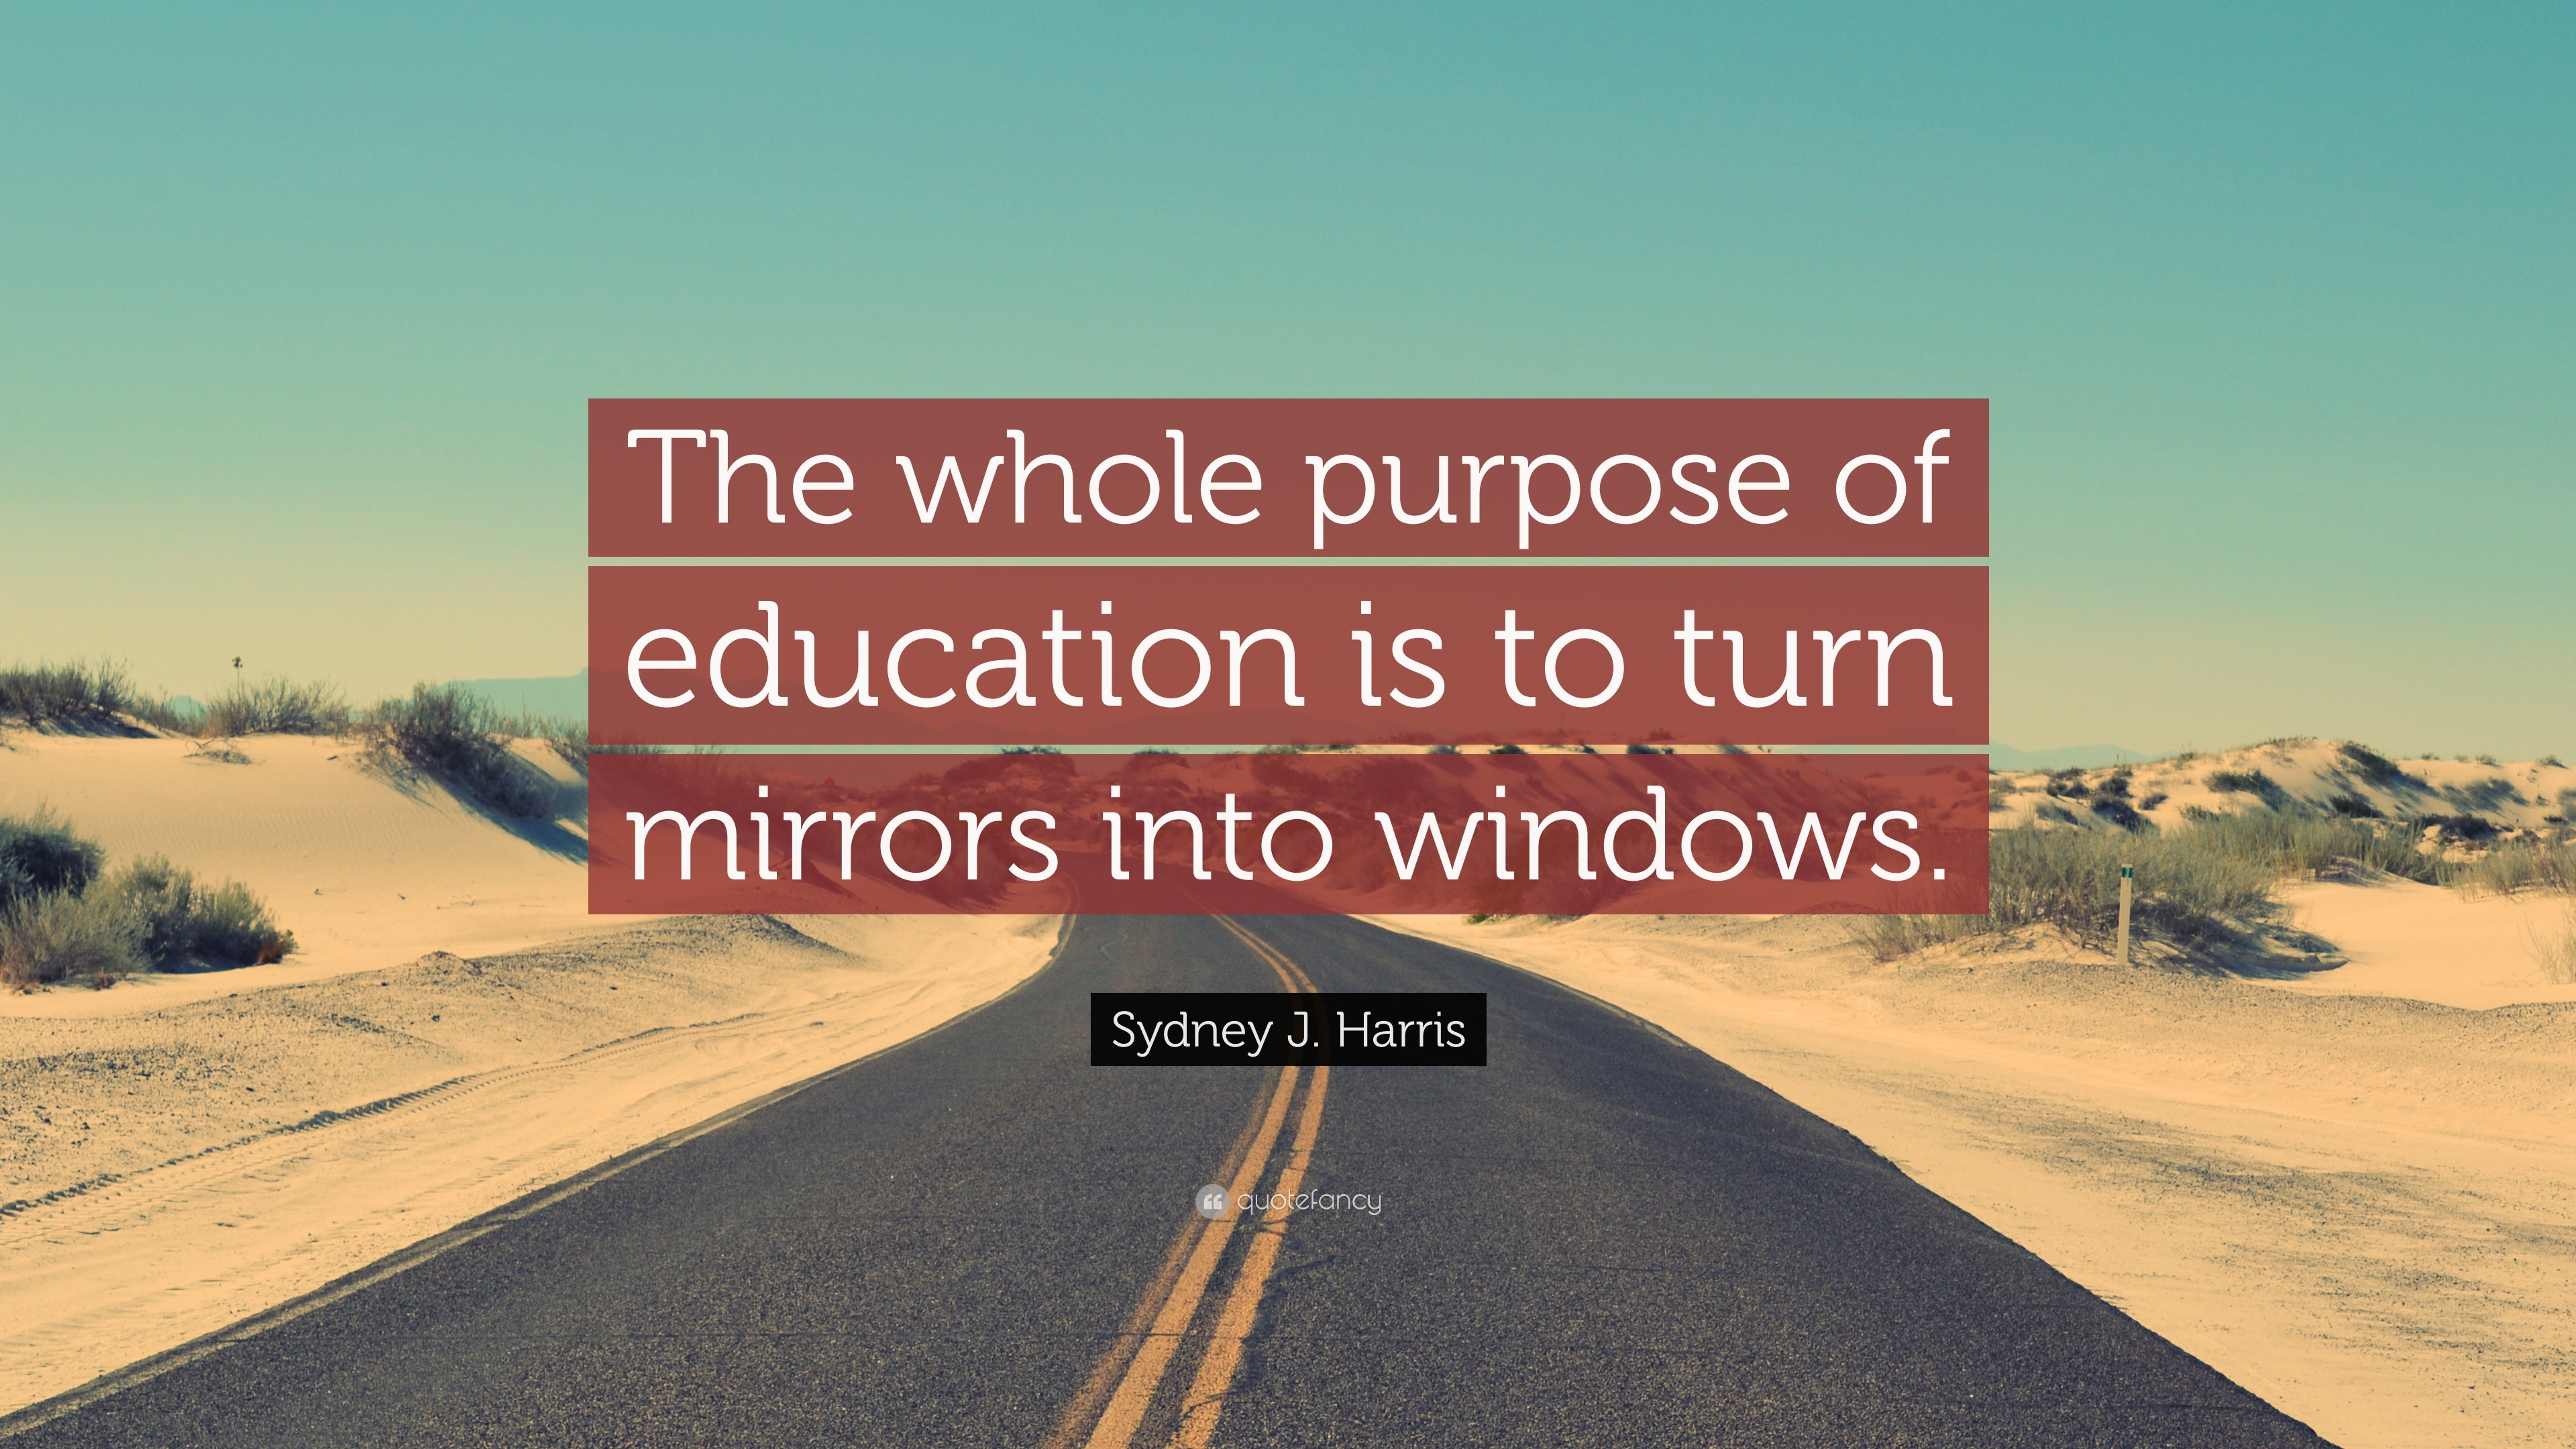 Sydney J. Harris Quote: “The whole purpose of education is to turn